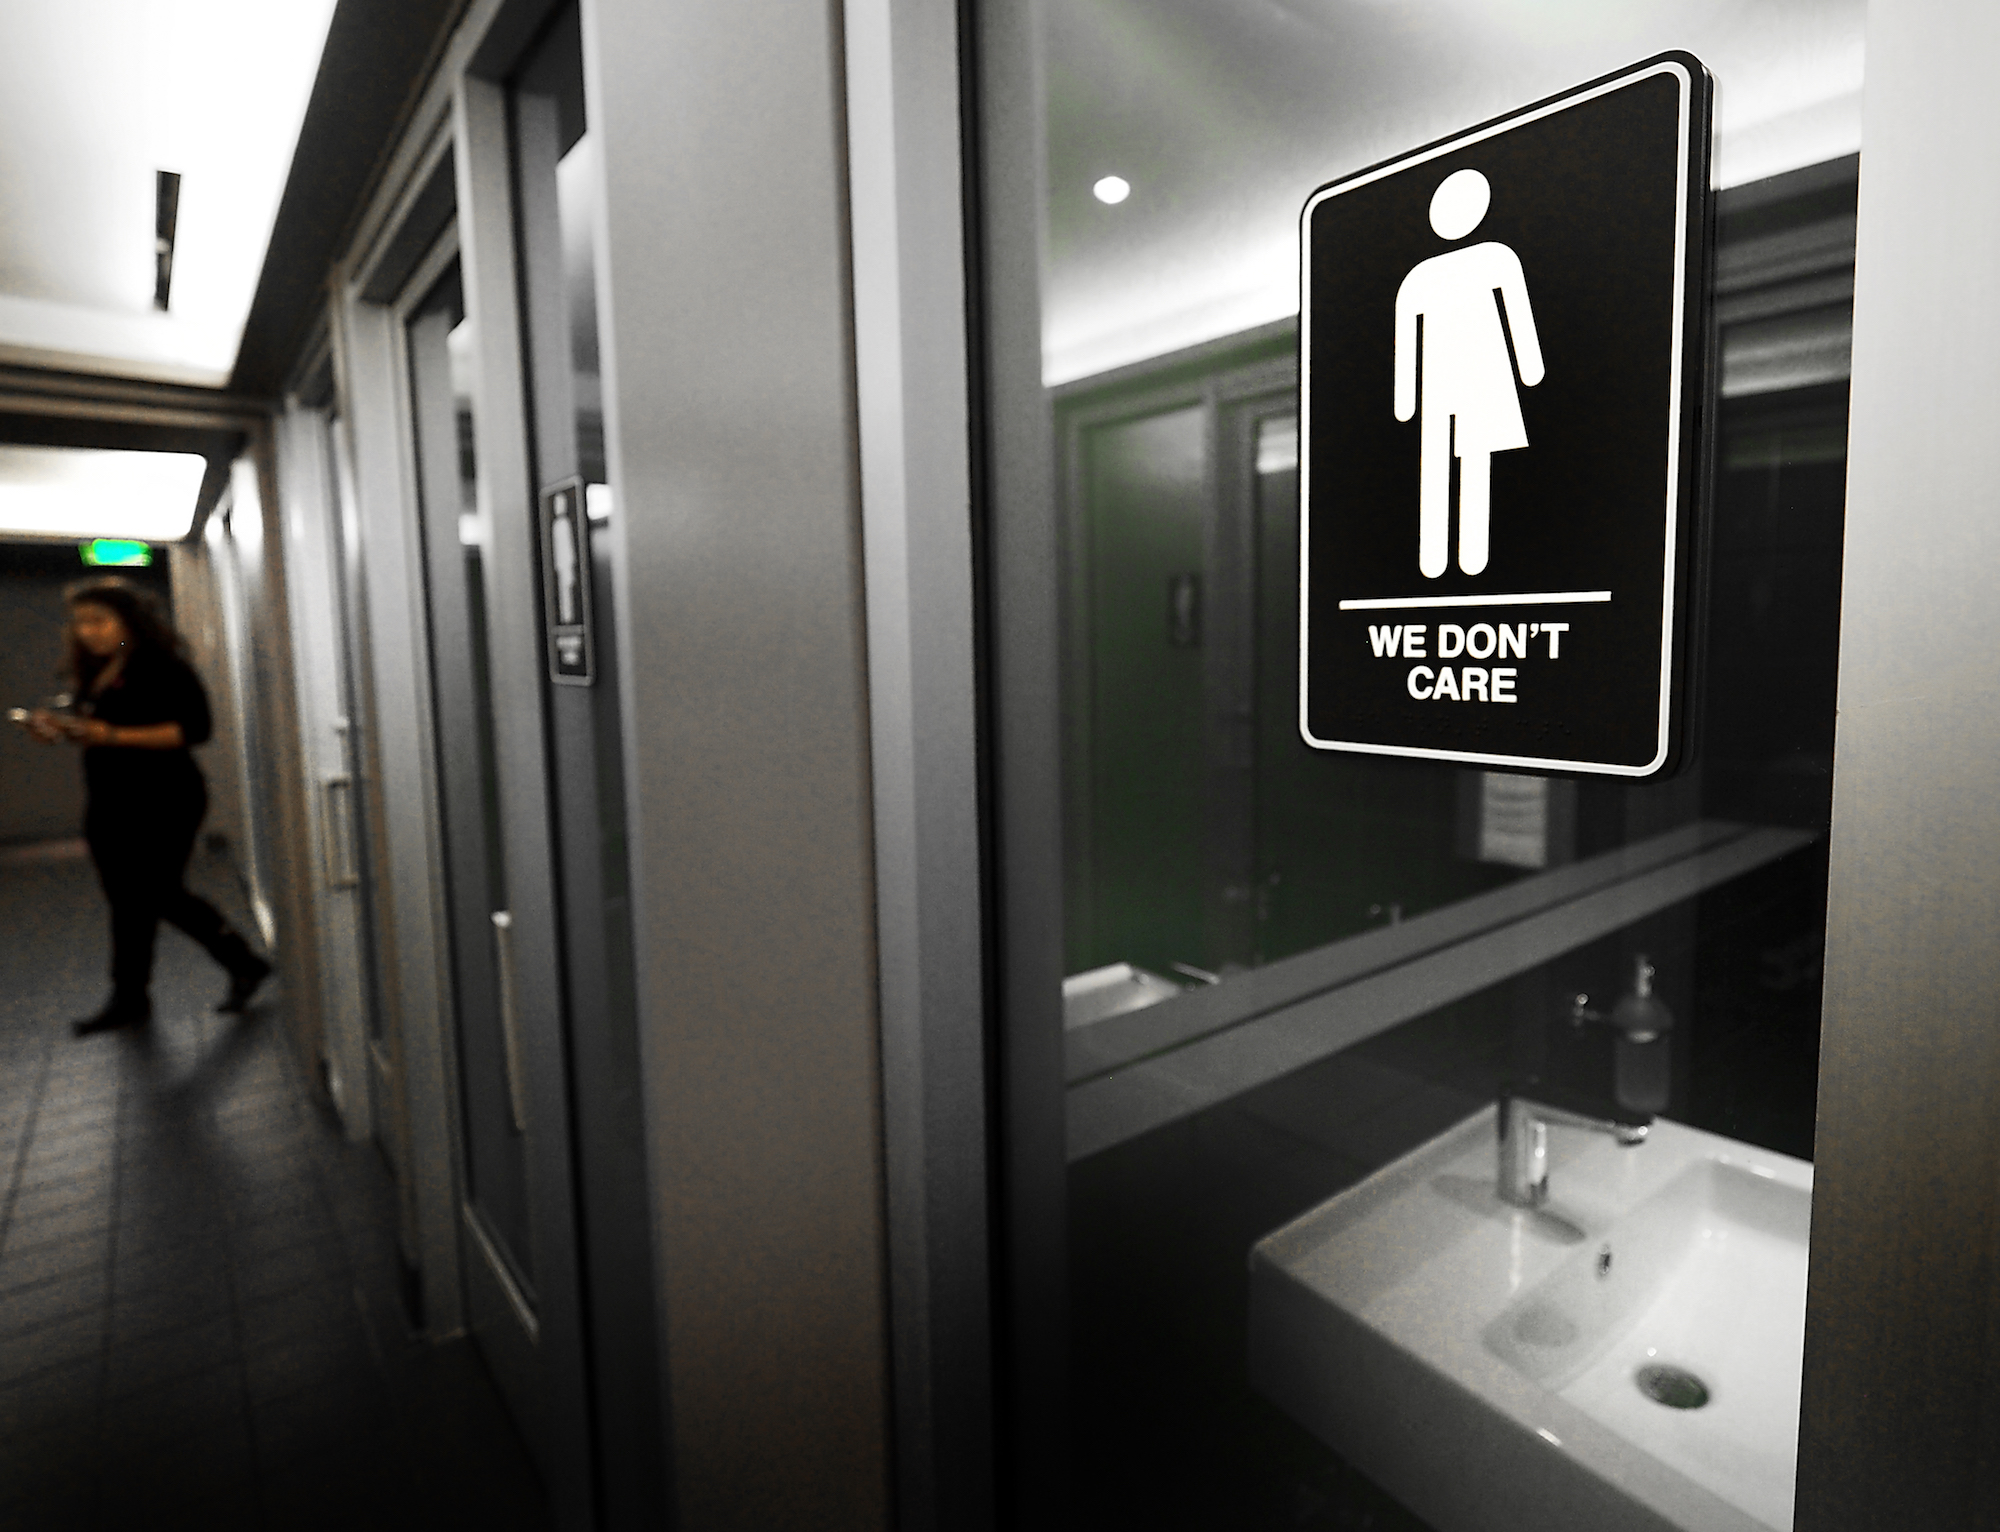 DURHAM, NC - MAY 10:  Gender neutral signs are posted in the 21C Museum Hotel public restrooms on May 10, 2016 in Durham, North Carolina.  Debate over transgender bathroom access spreads nationwide as the U.S. Department of Justice countersues North Carolina Governor Pat McCrory from enforcing the provisions of House Bill 2 that dictate what bathrooms transgender individuals can use.  (Photo by Sara D. Davis/Getty Images)